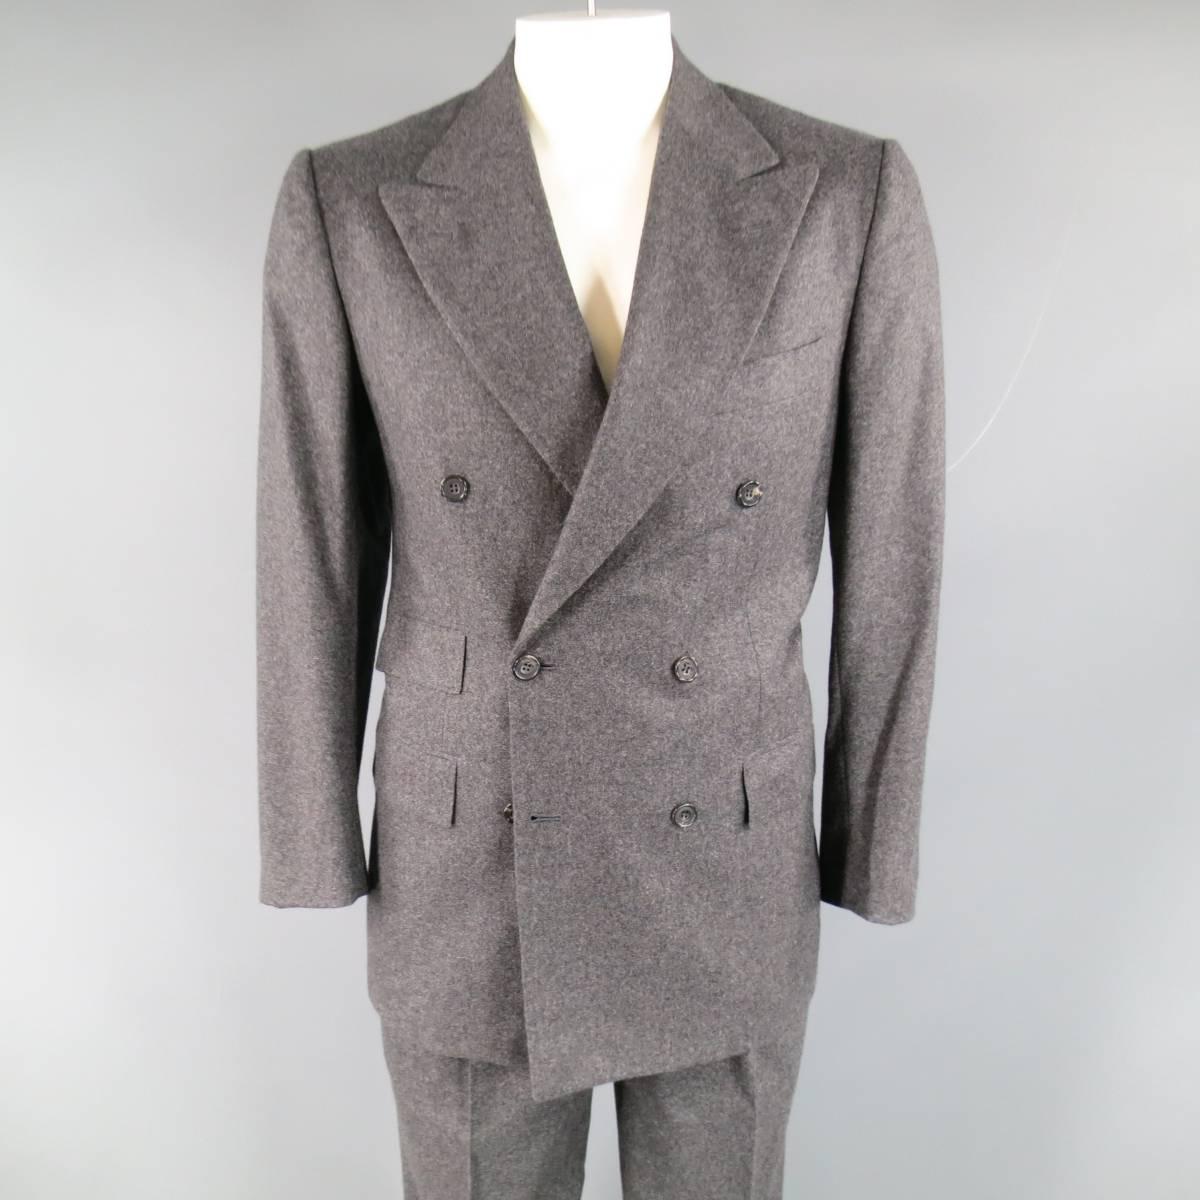 Classic men's KITON for WILKES BASHFORD two piece suit in charcoal Heather gray cashmere including a double breasted, notchlapel sport coat with triple flap pockets, and double vented back with matching pleated, cuffed hem trousers. Made in Italy.
